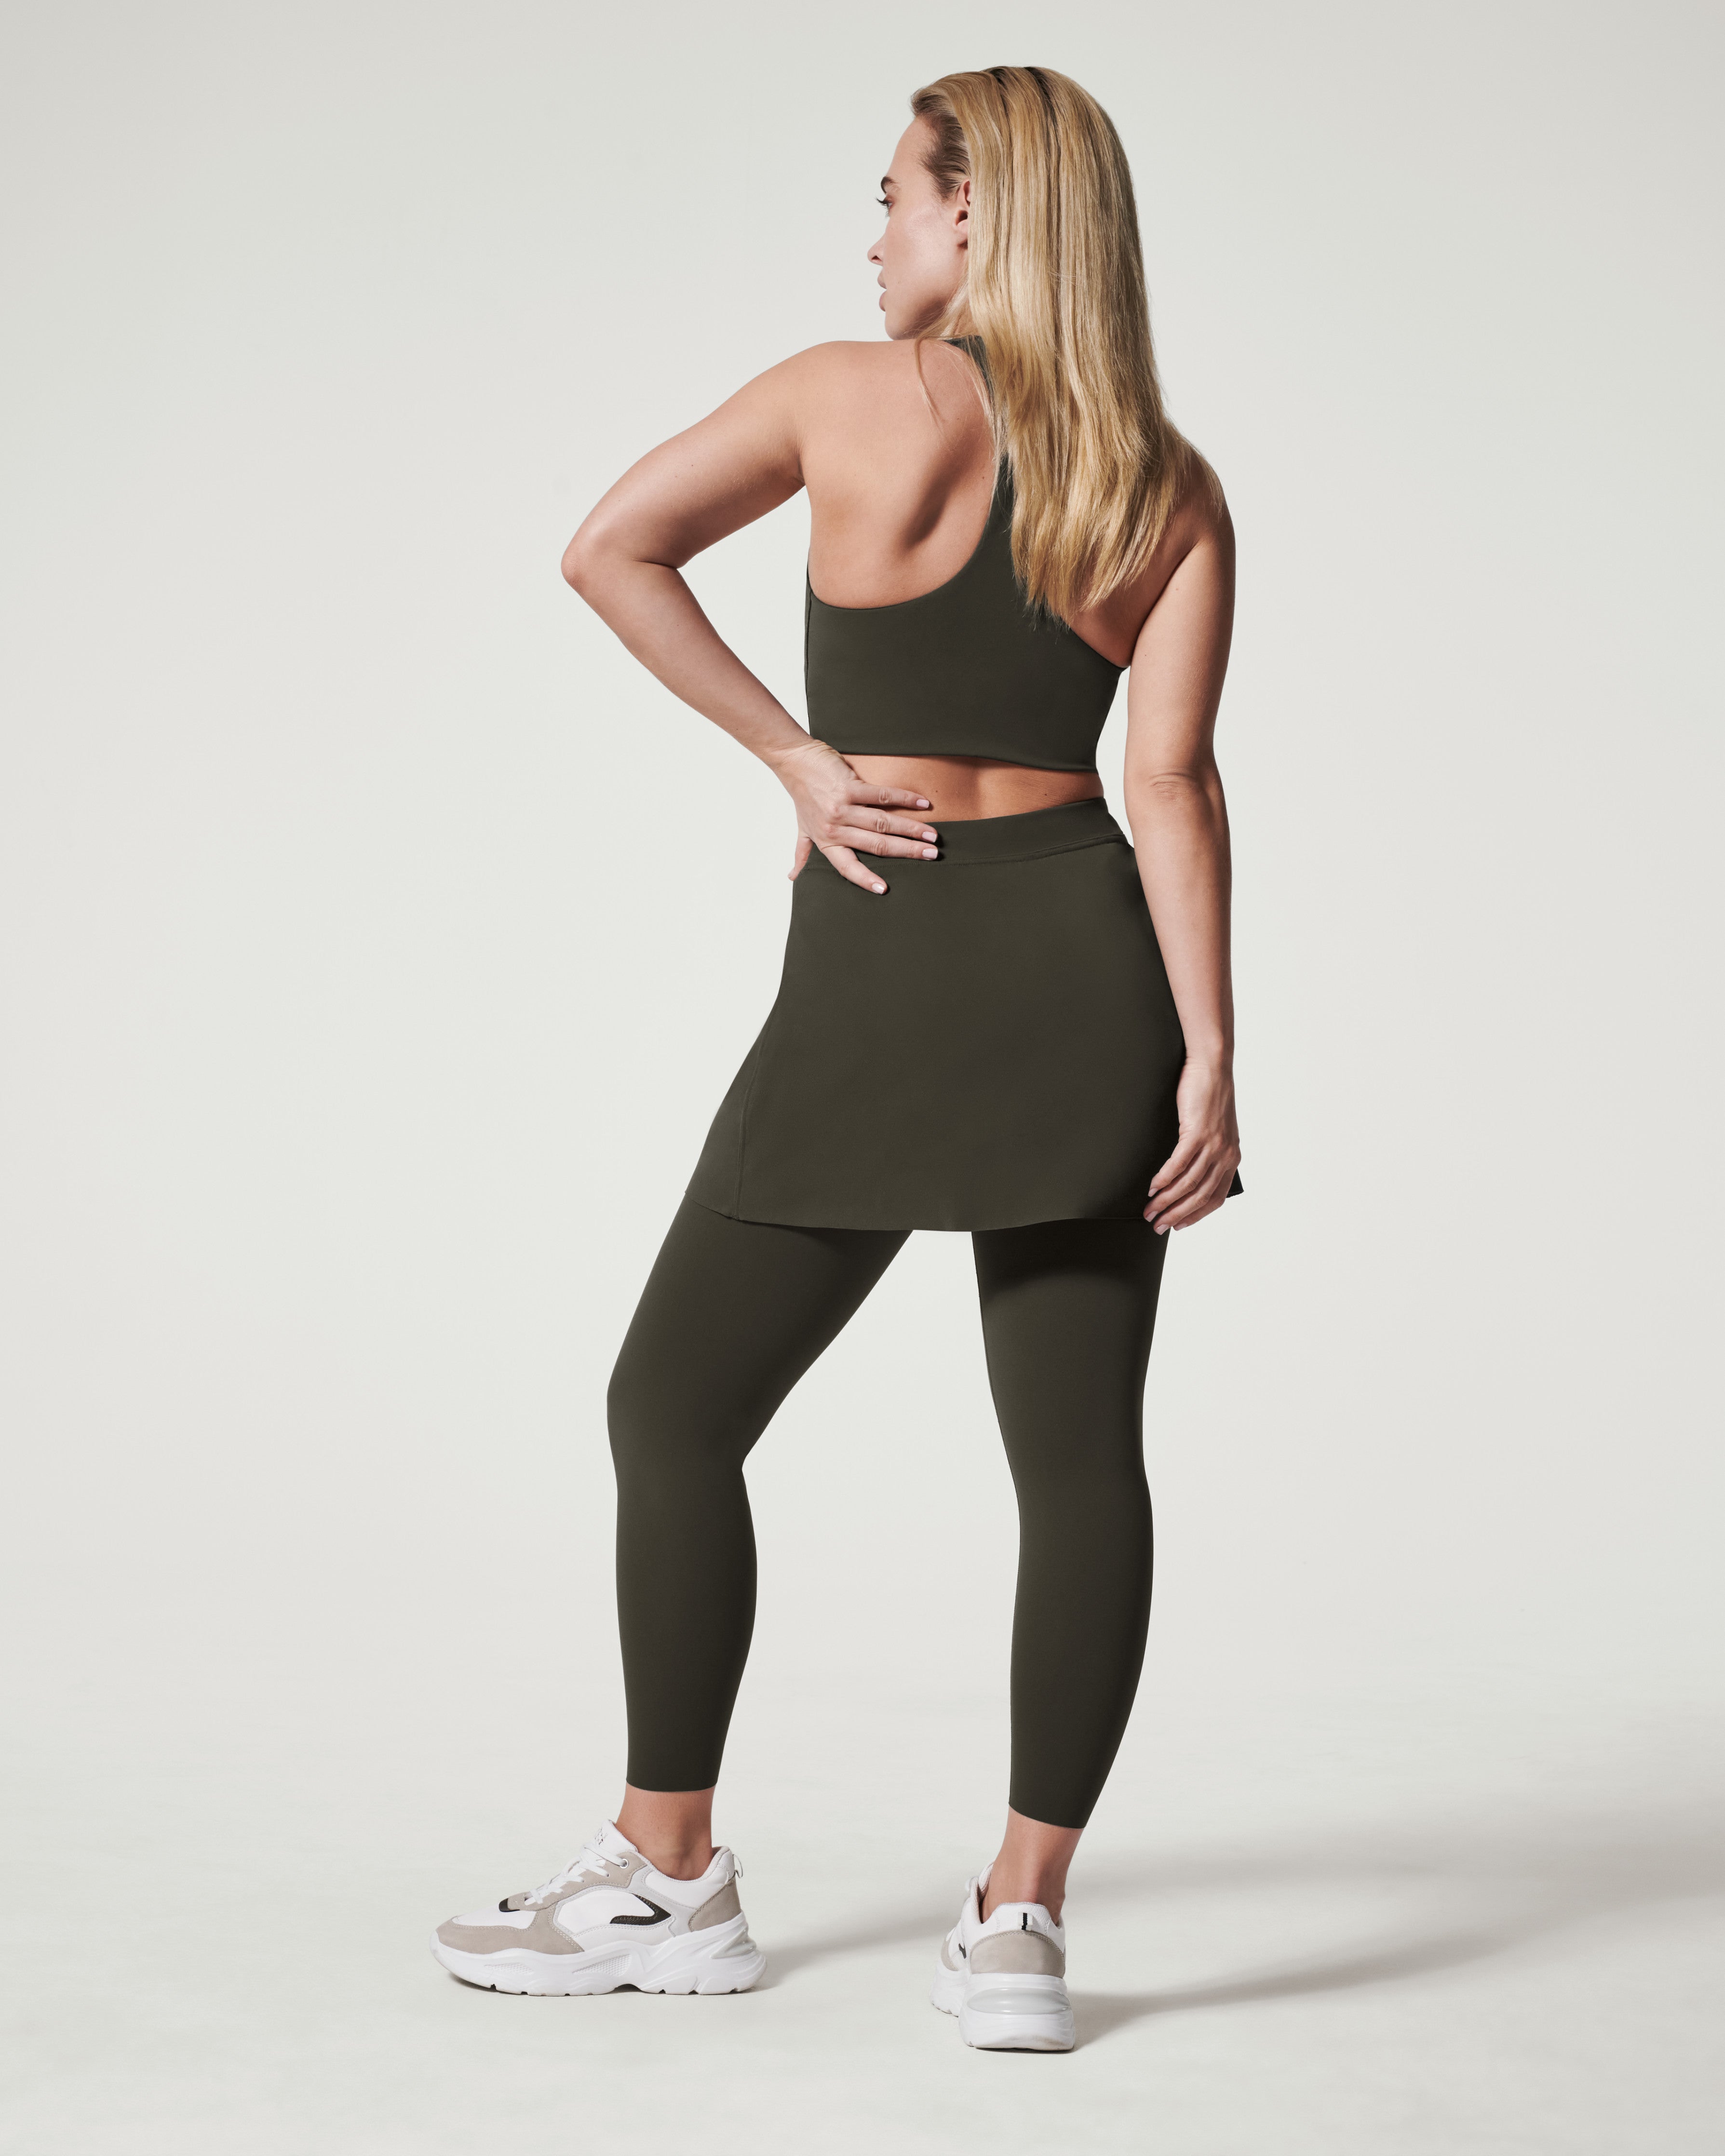 Booty Boost Active 7/8 Leggings, Spanx